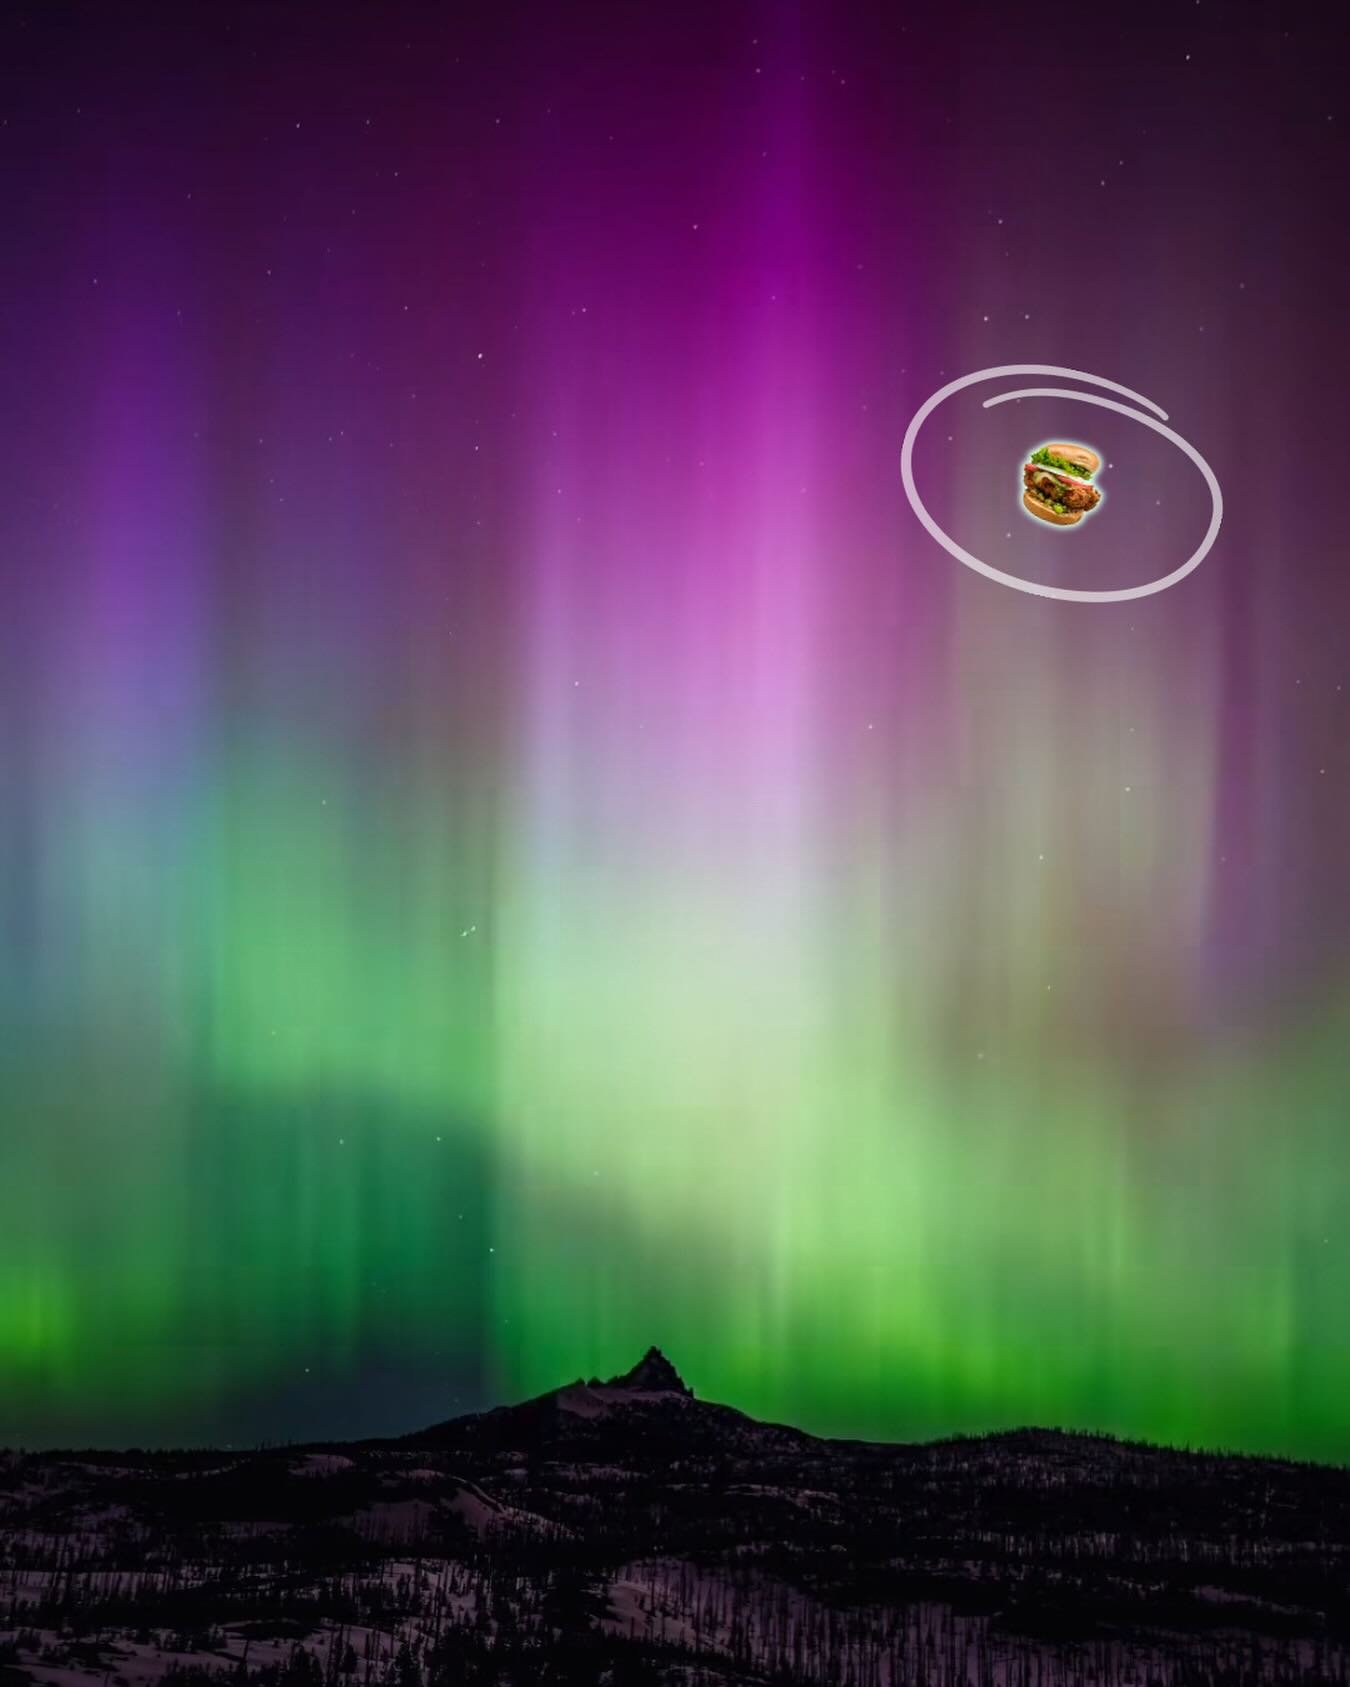 Anyone else see that burger in the sky last night!? Crazy. 😆

credit: @whitwhitehouse